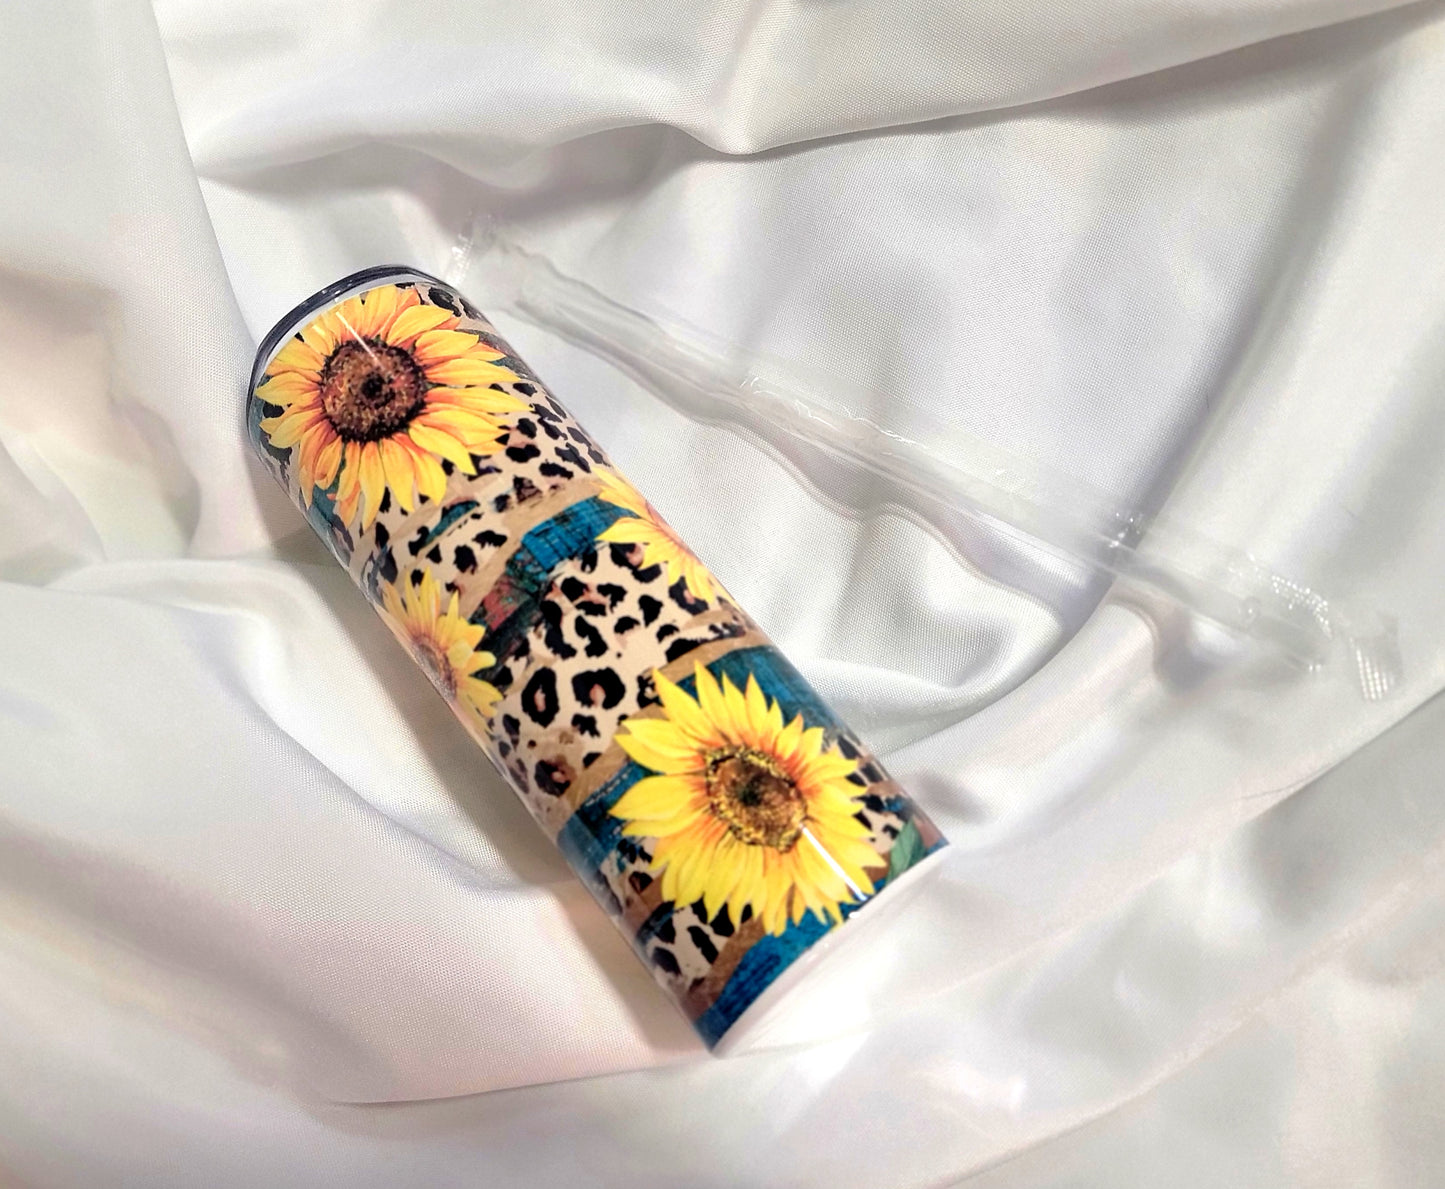 20 oz tumbler with leopard print and sunflowers